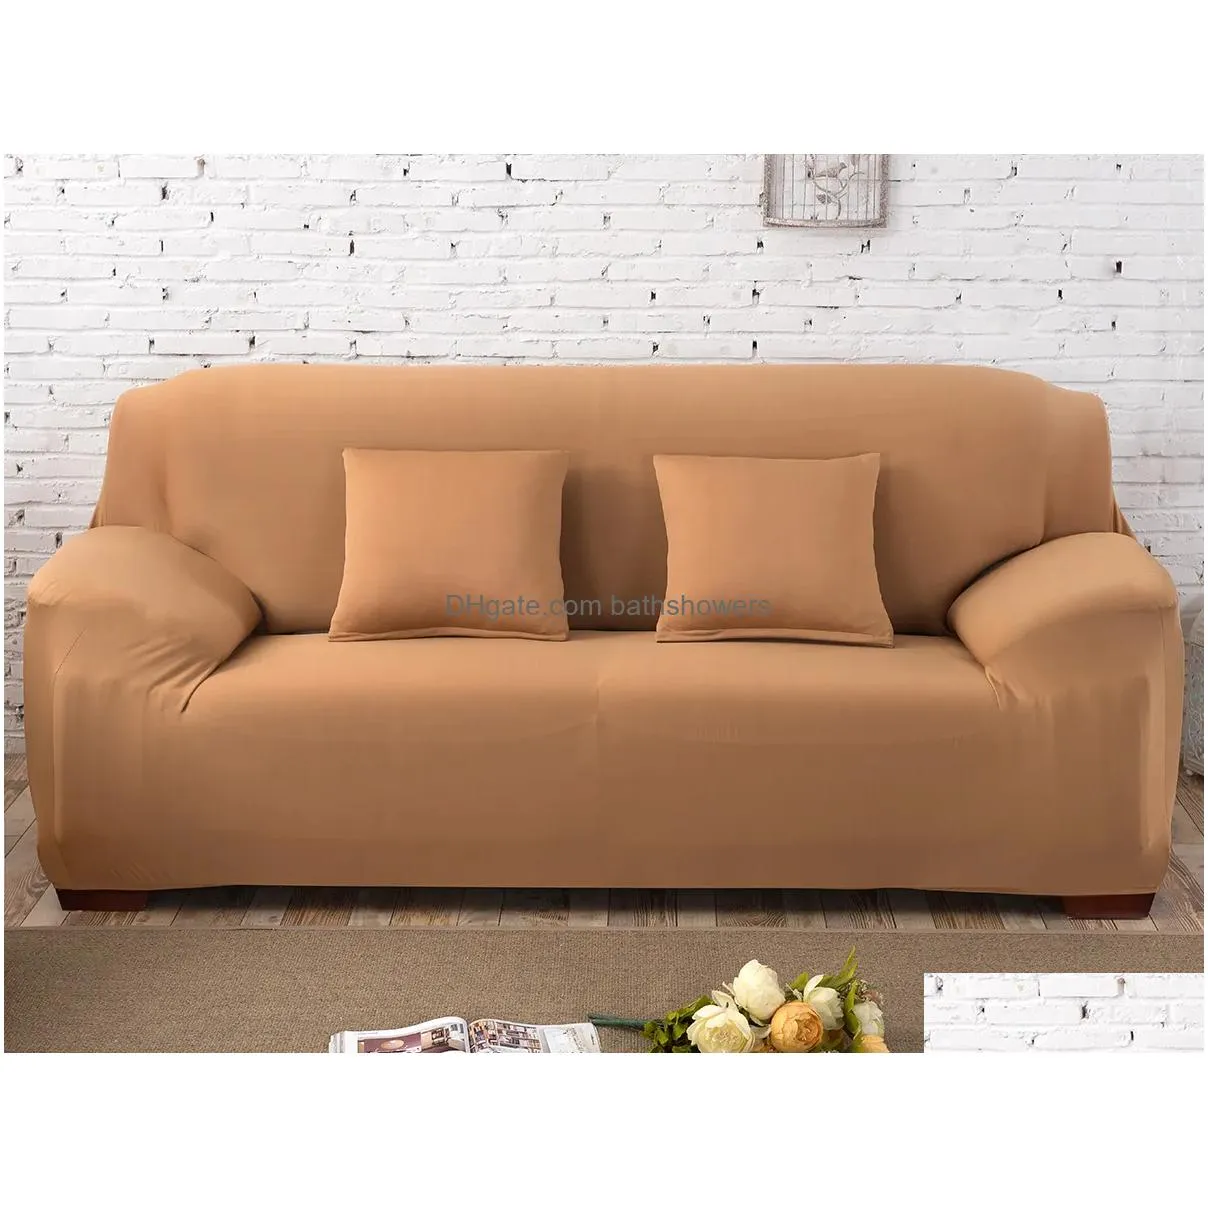 modern sofa cover spandex elastic for living room l shapeor corner 1sectional